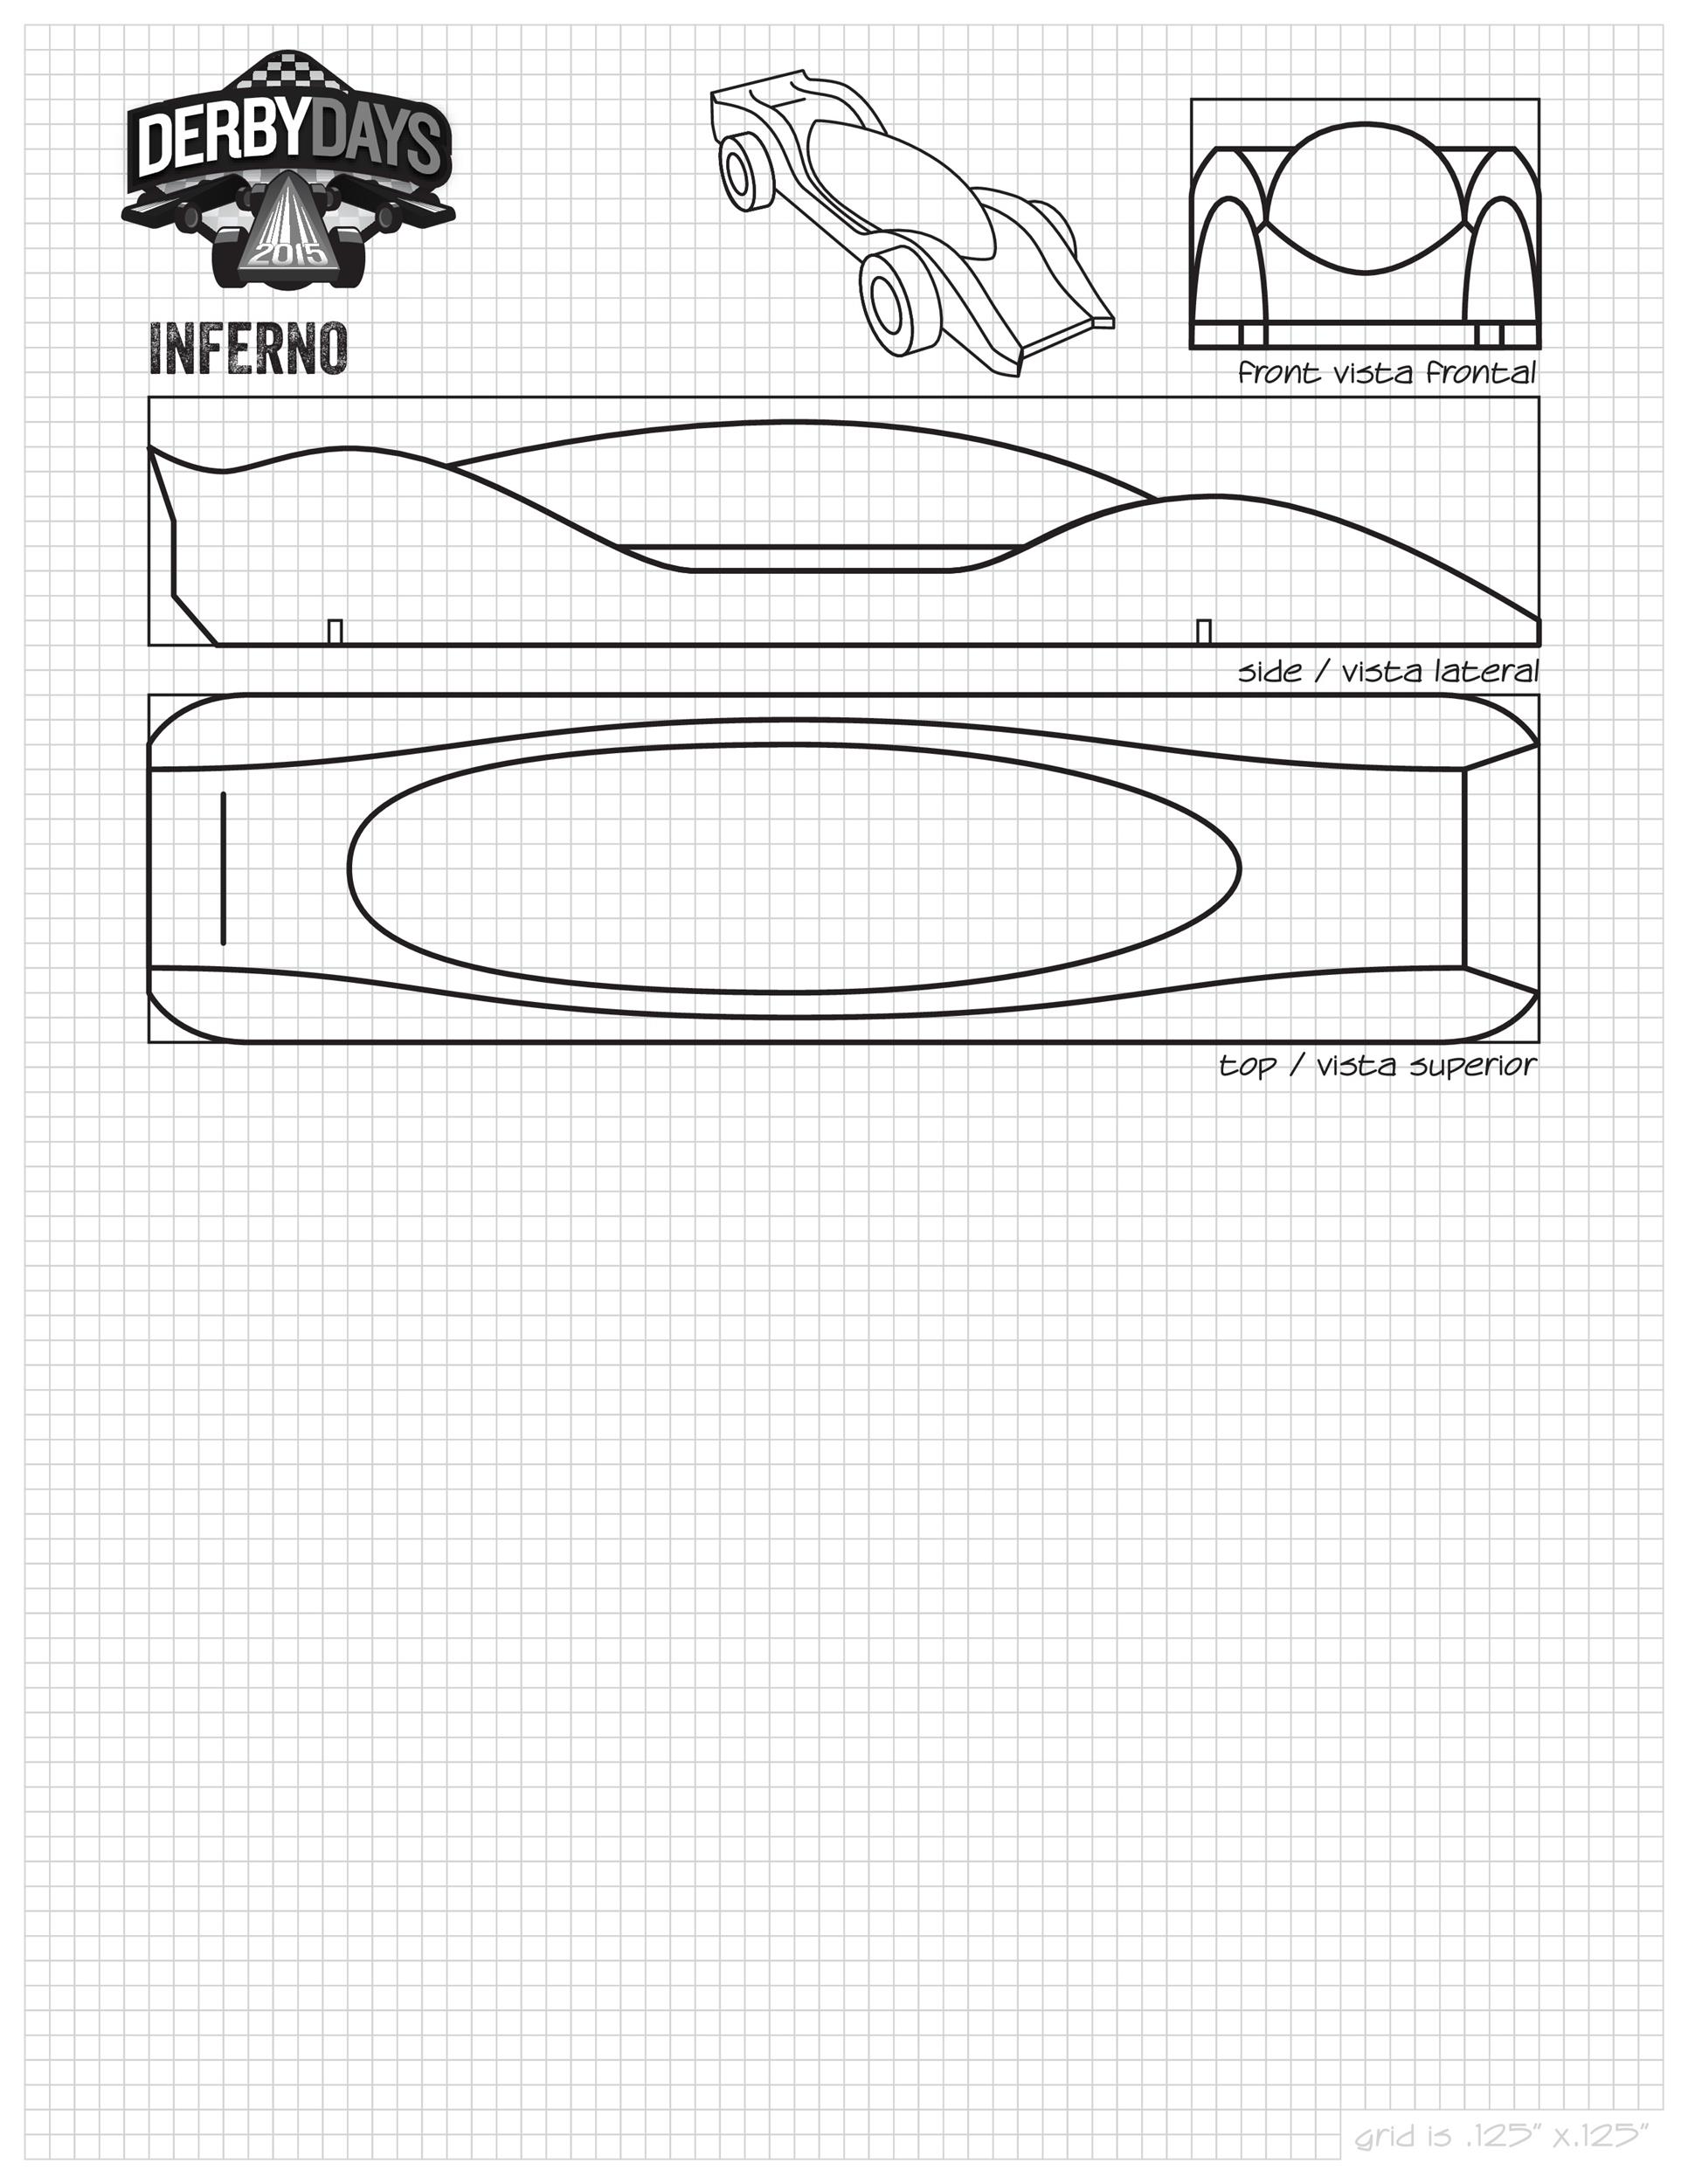 39-awesome-pinewood-derby-car-designs-templates-template-lab